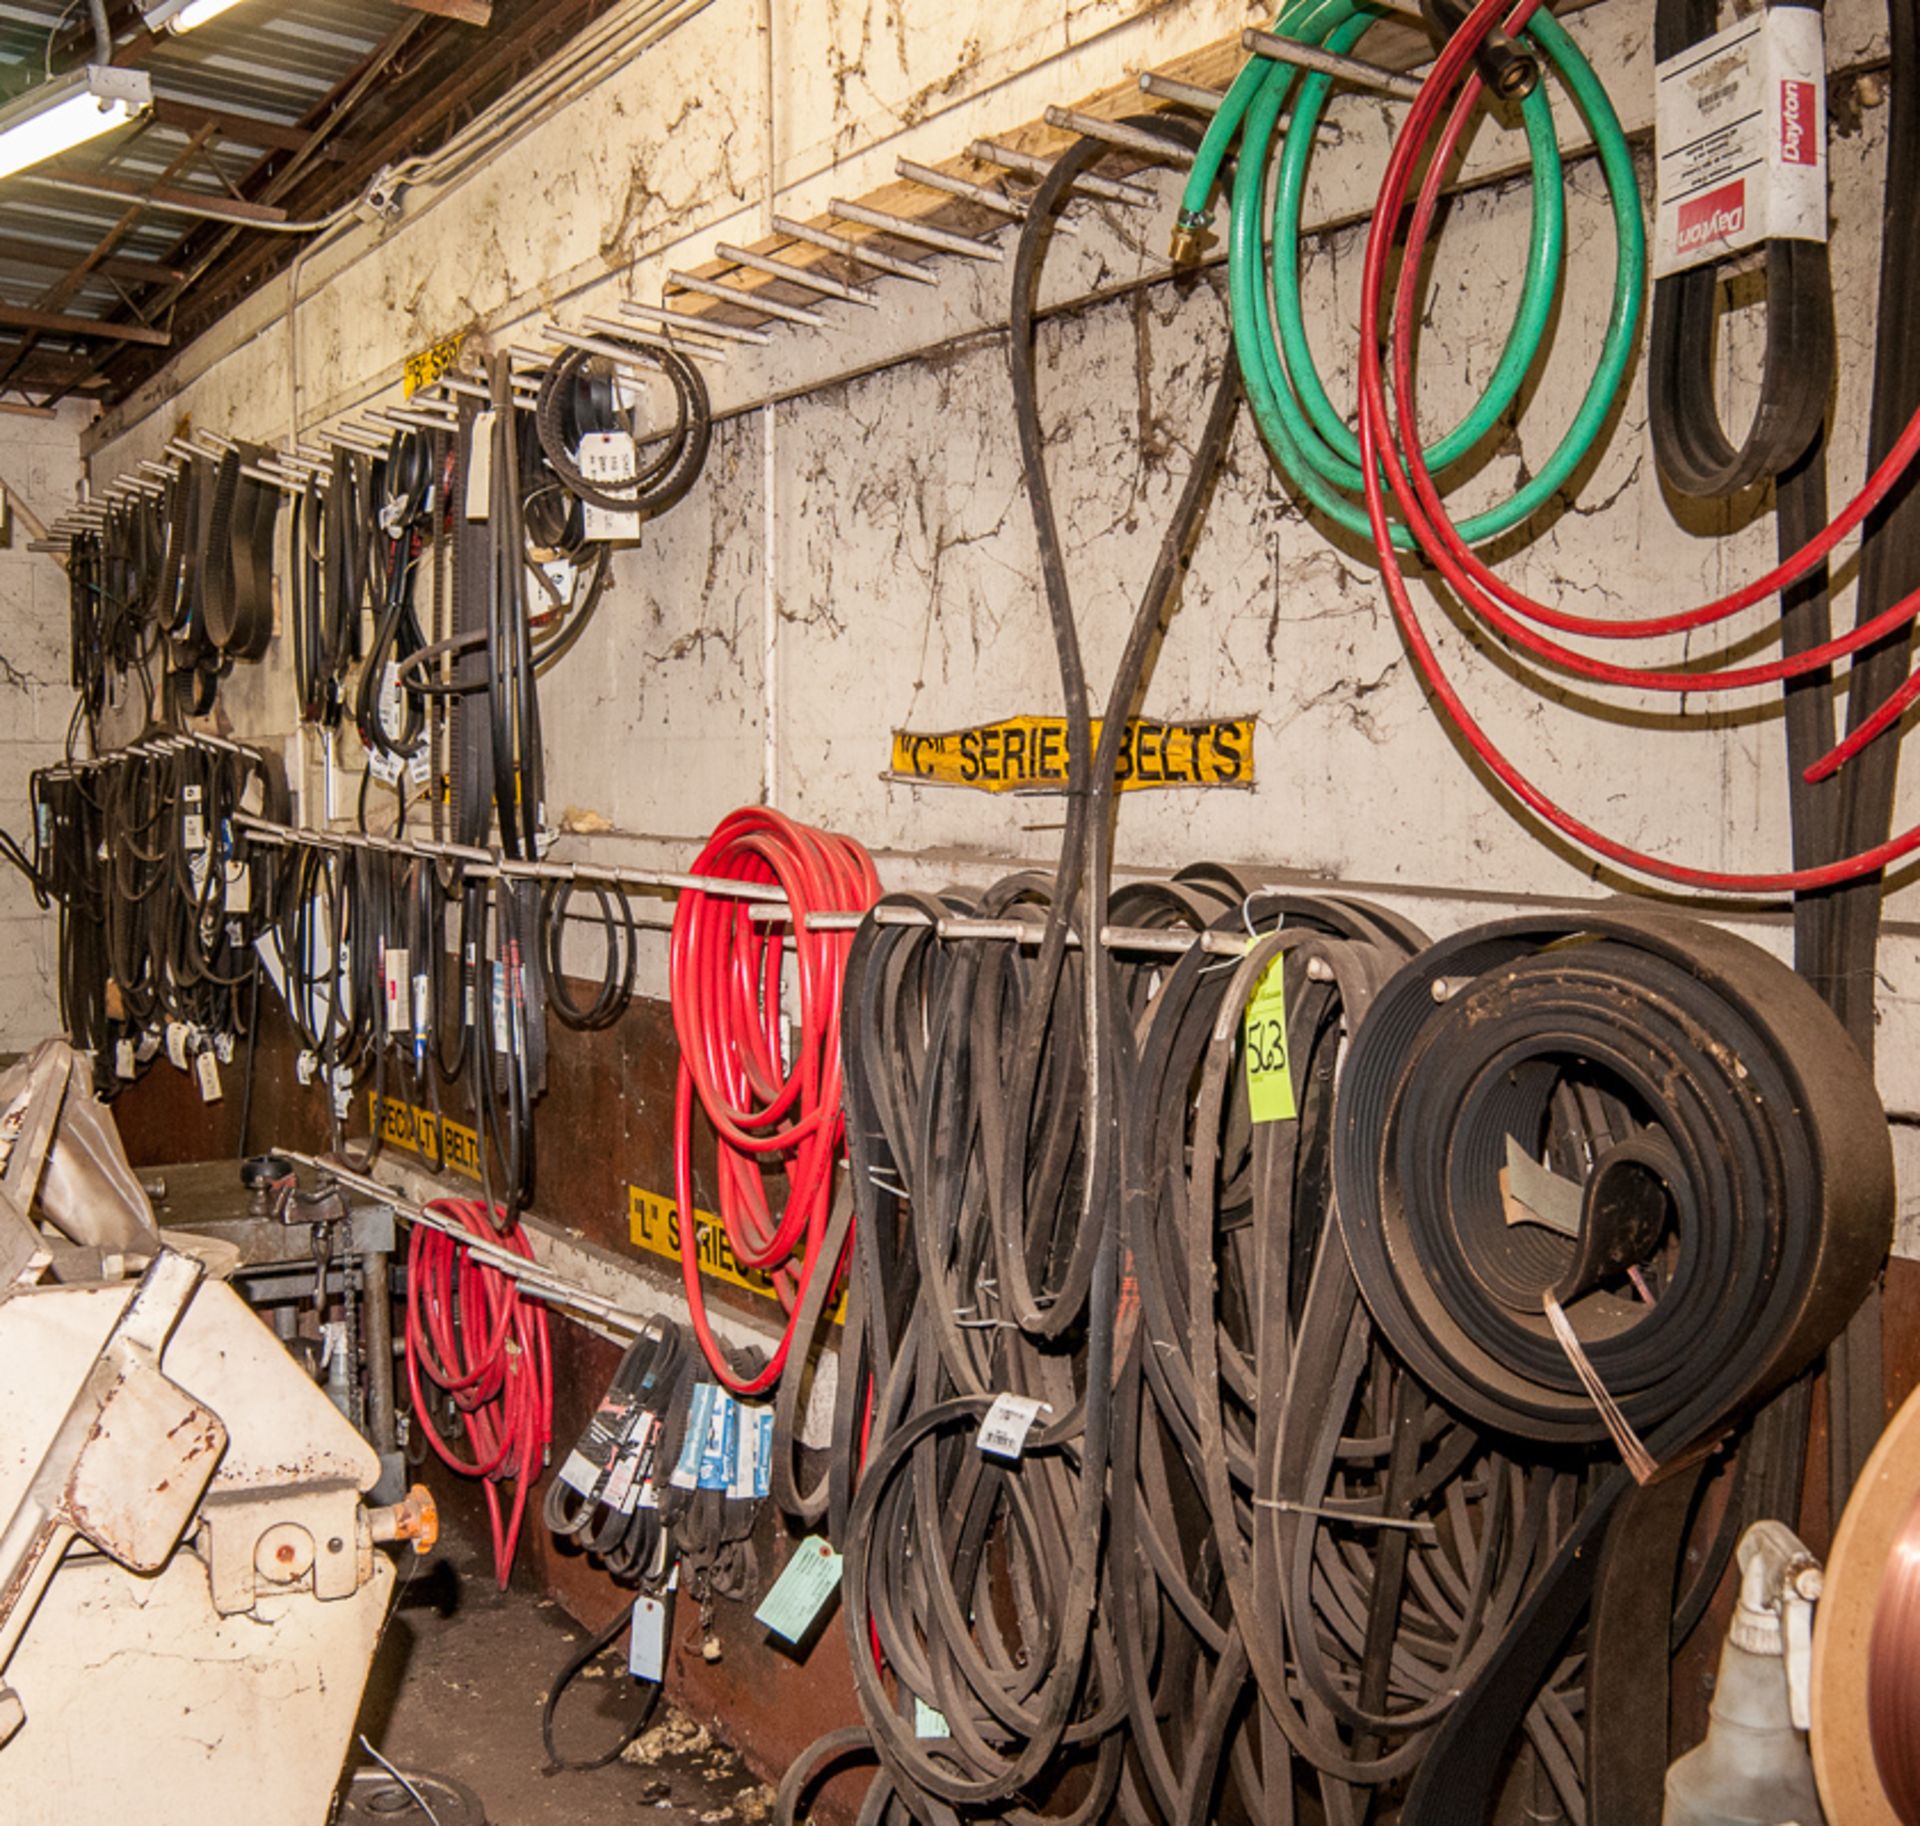 Belts and hoses on wall